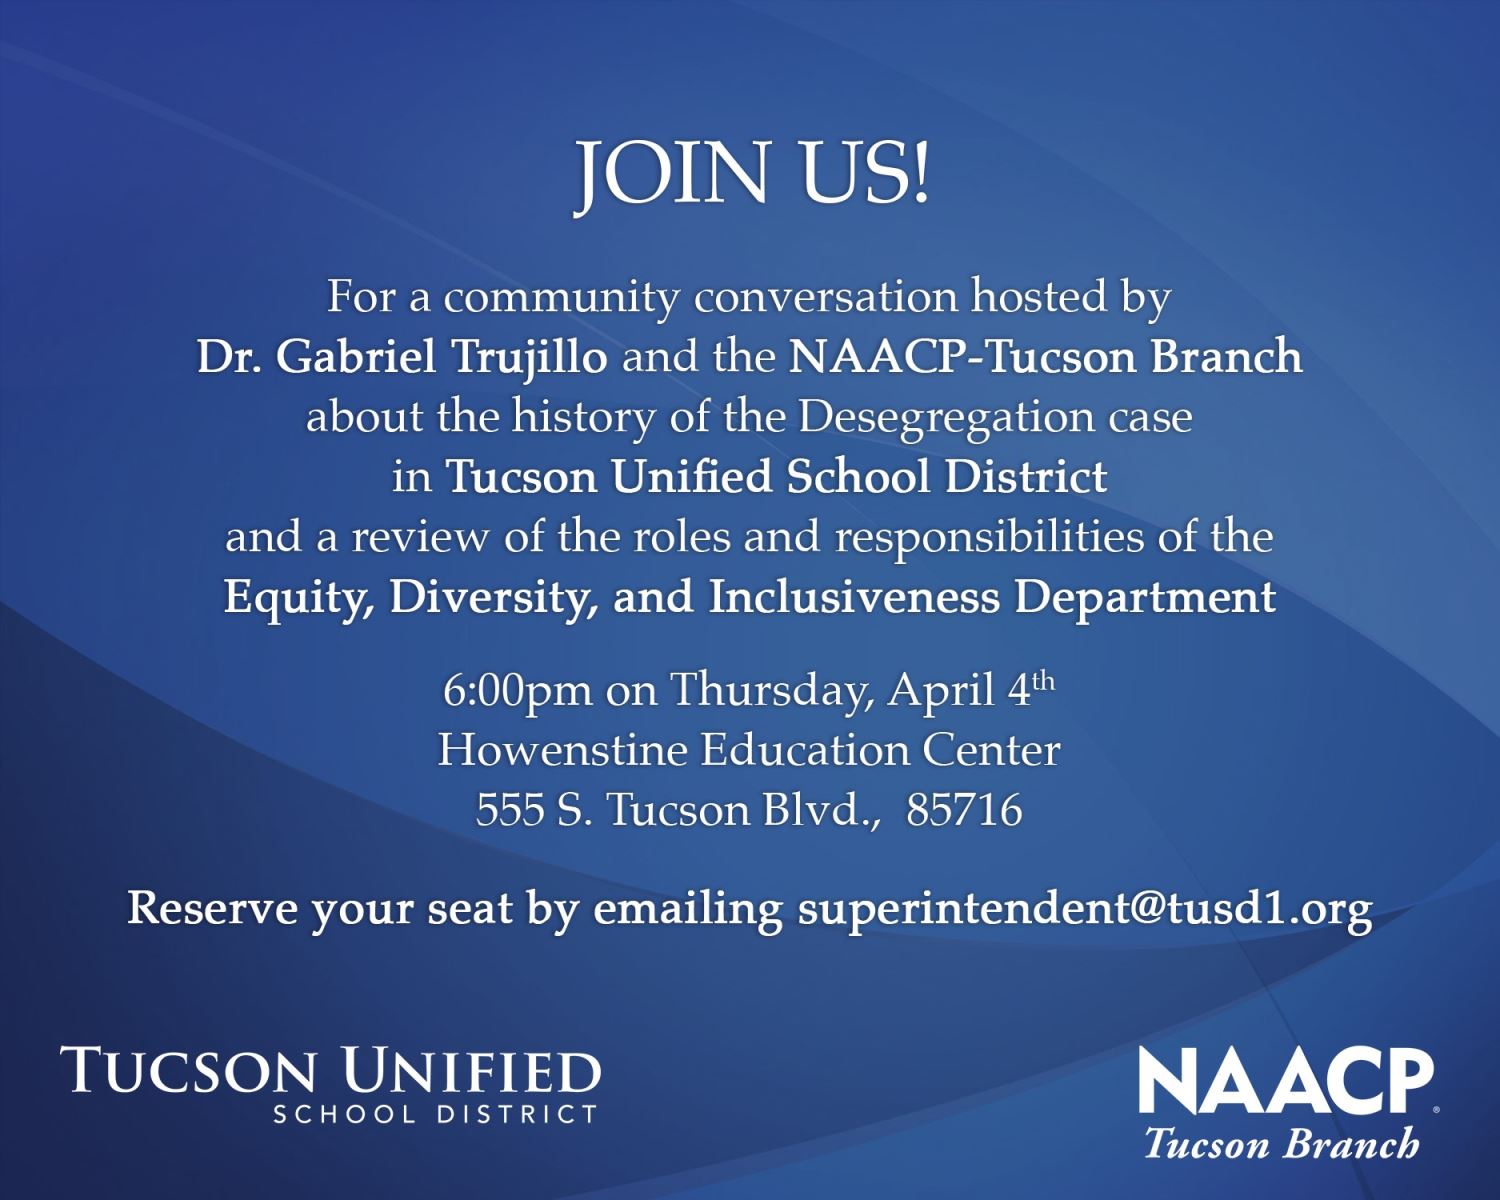 Join us for a community conversation hosted by Dr. Gabriel Trujillo and the NAACP-Tucson Branch about the history of the Desegregation case in Tucson Unified School District and a review of the roles and responsibilities of the Equity, Diversity and Inclusiveness Department. Thursday, April 4 | 6 pm | Howenstine Education Center | 555 S. Tucson Blvd., 85716  Reserve your seat by email.